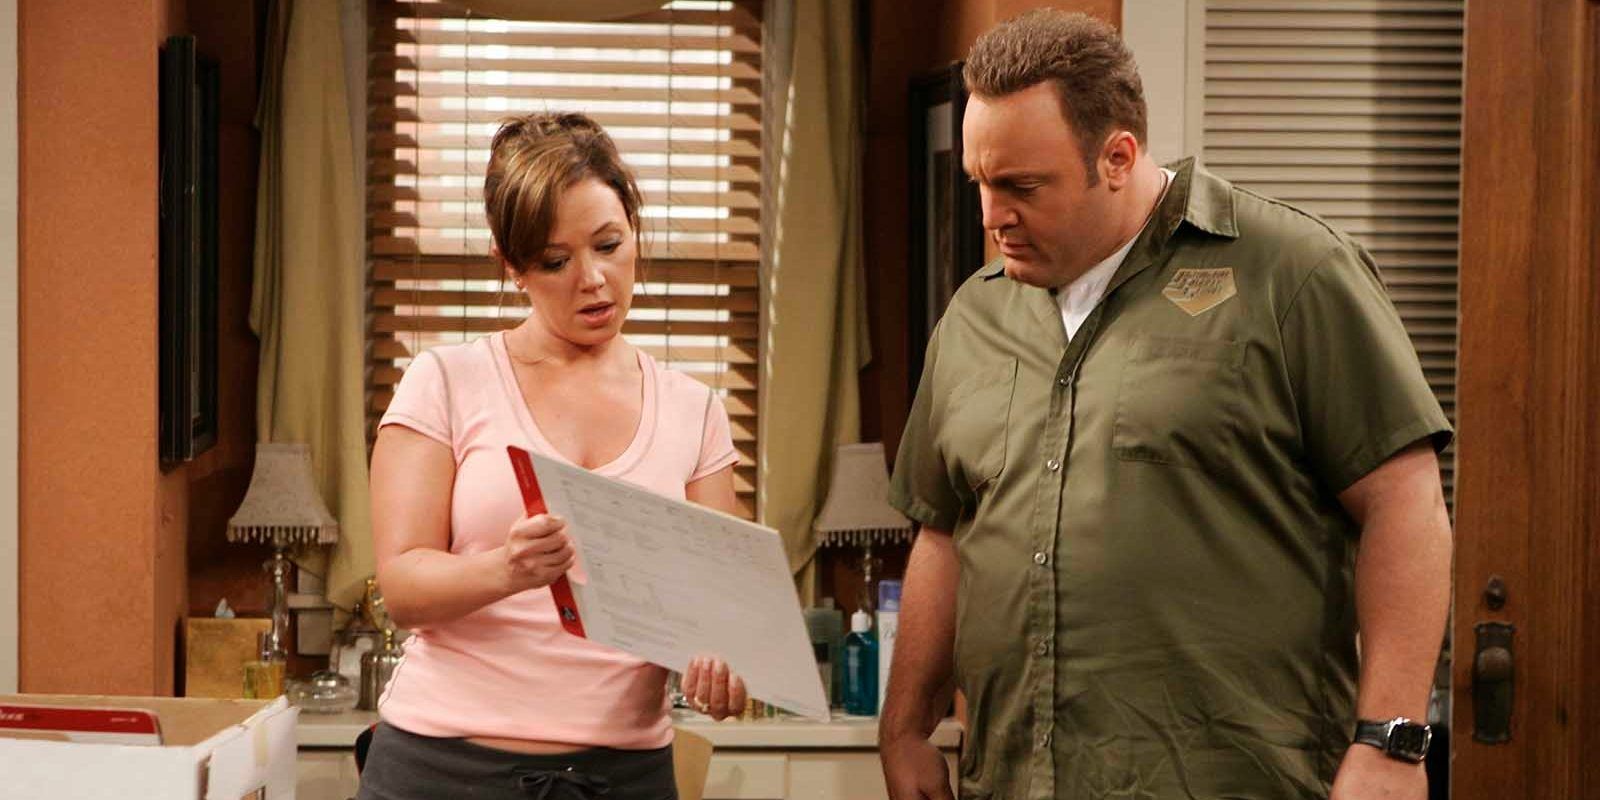 The King Of Queens: 12 Hidden Details About The Main Characters